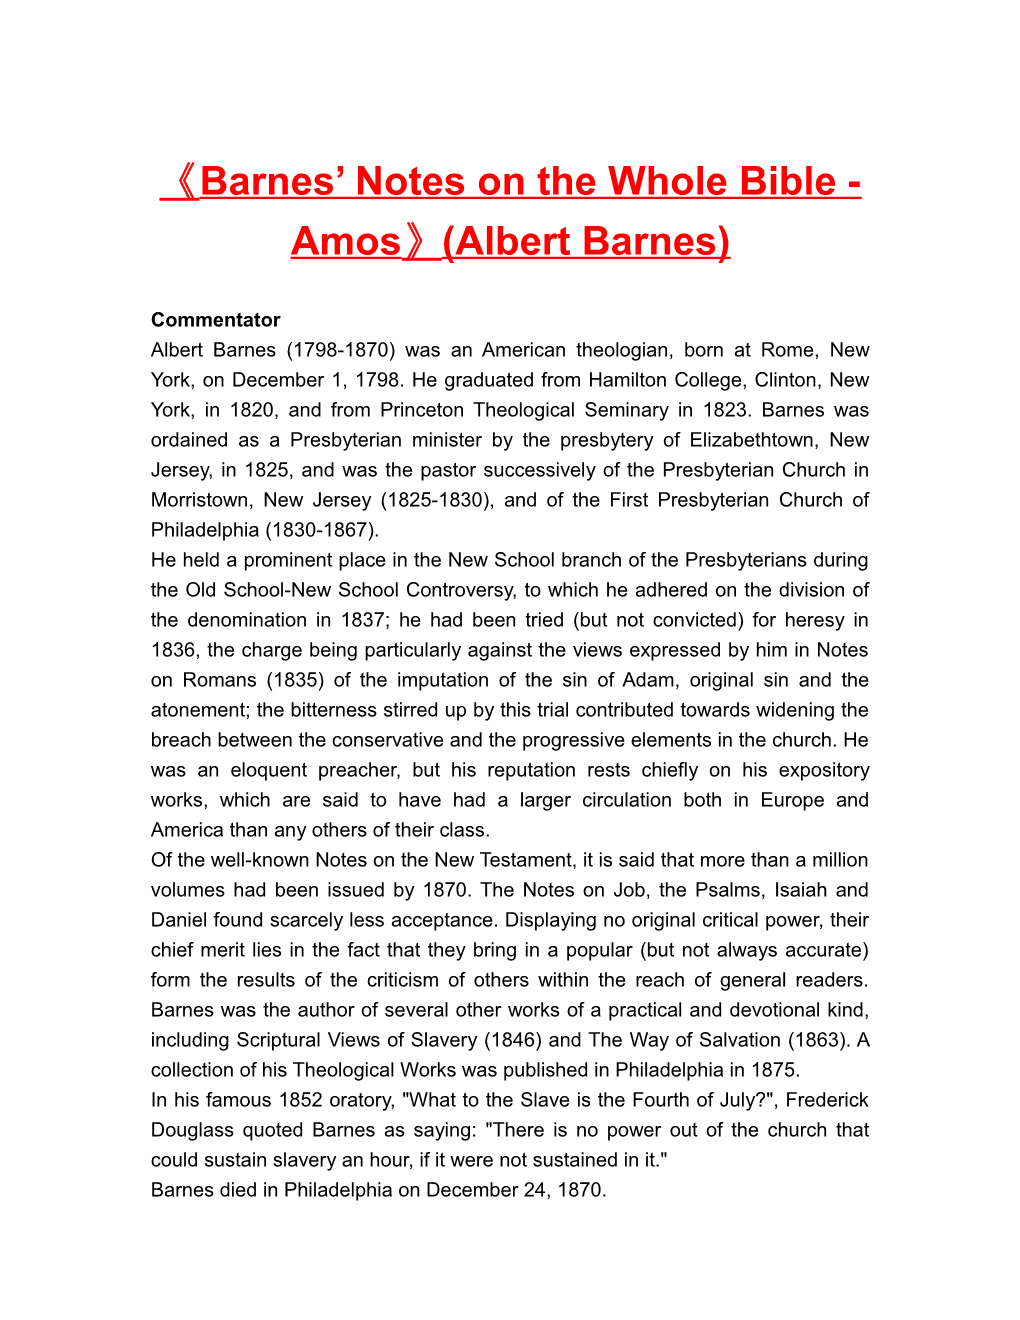 Barnes Notes on the Whole Bible - Amos (Albert Barnes)